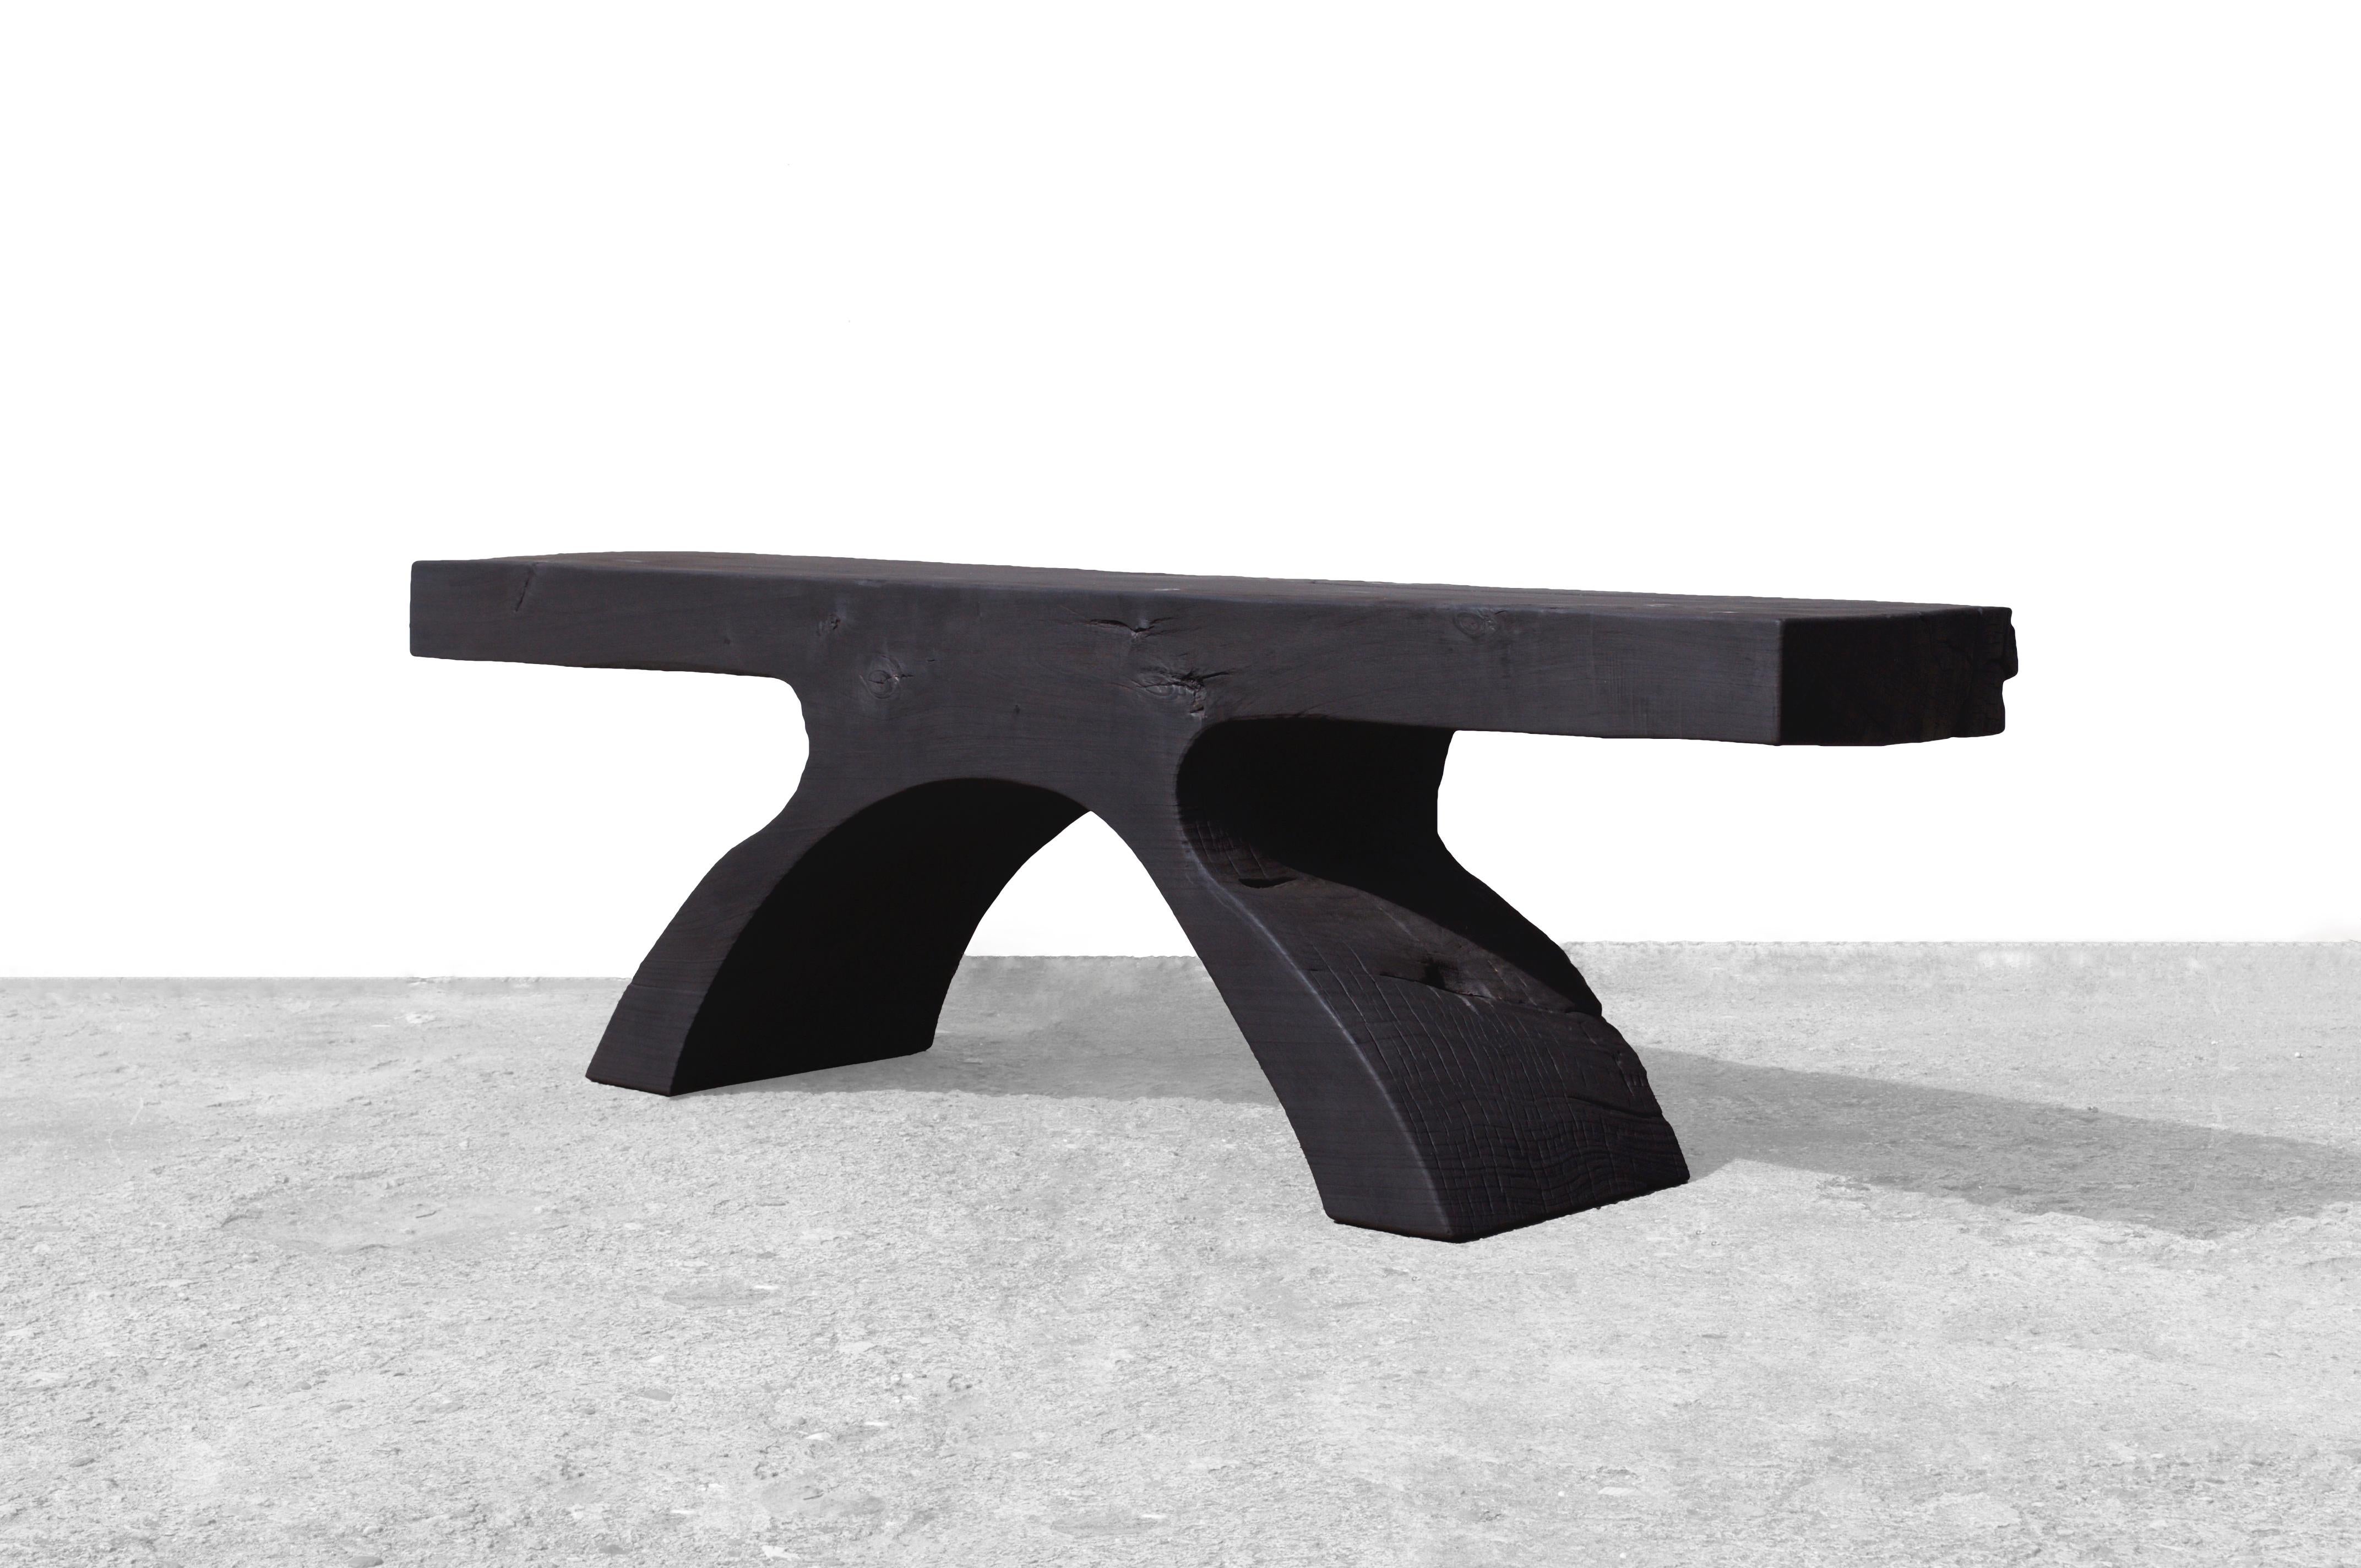 Unique bench sculpted by Jörg Pietschmann
Materials: polished poplar, oil finish
Dimensions: H 53 x W 184 x D 34 cm

In Pietschmann’s sculptures, trees that for centuries were part of a landscape and founded in primordial forces tell stories